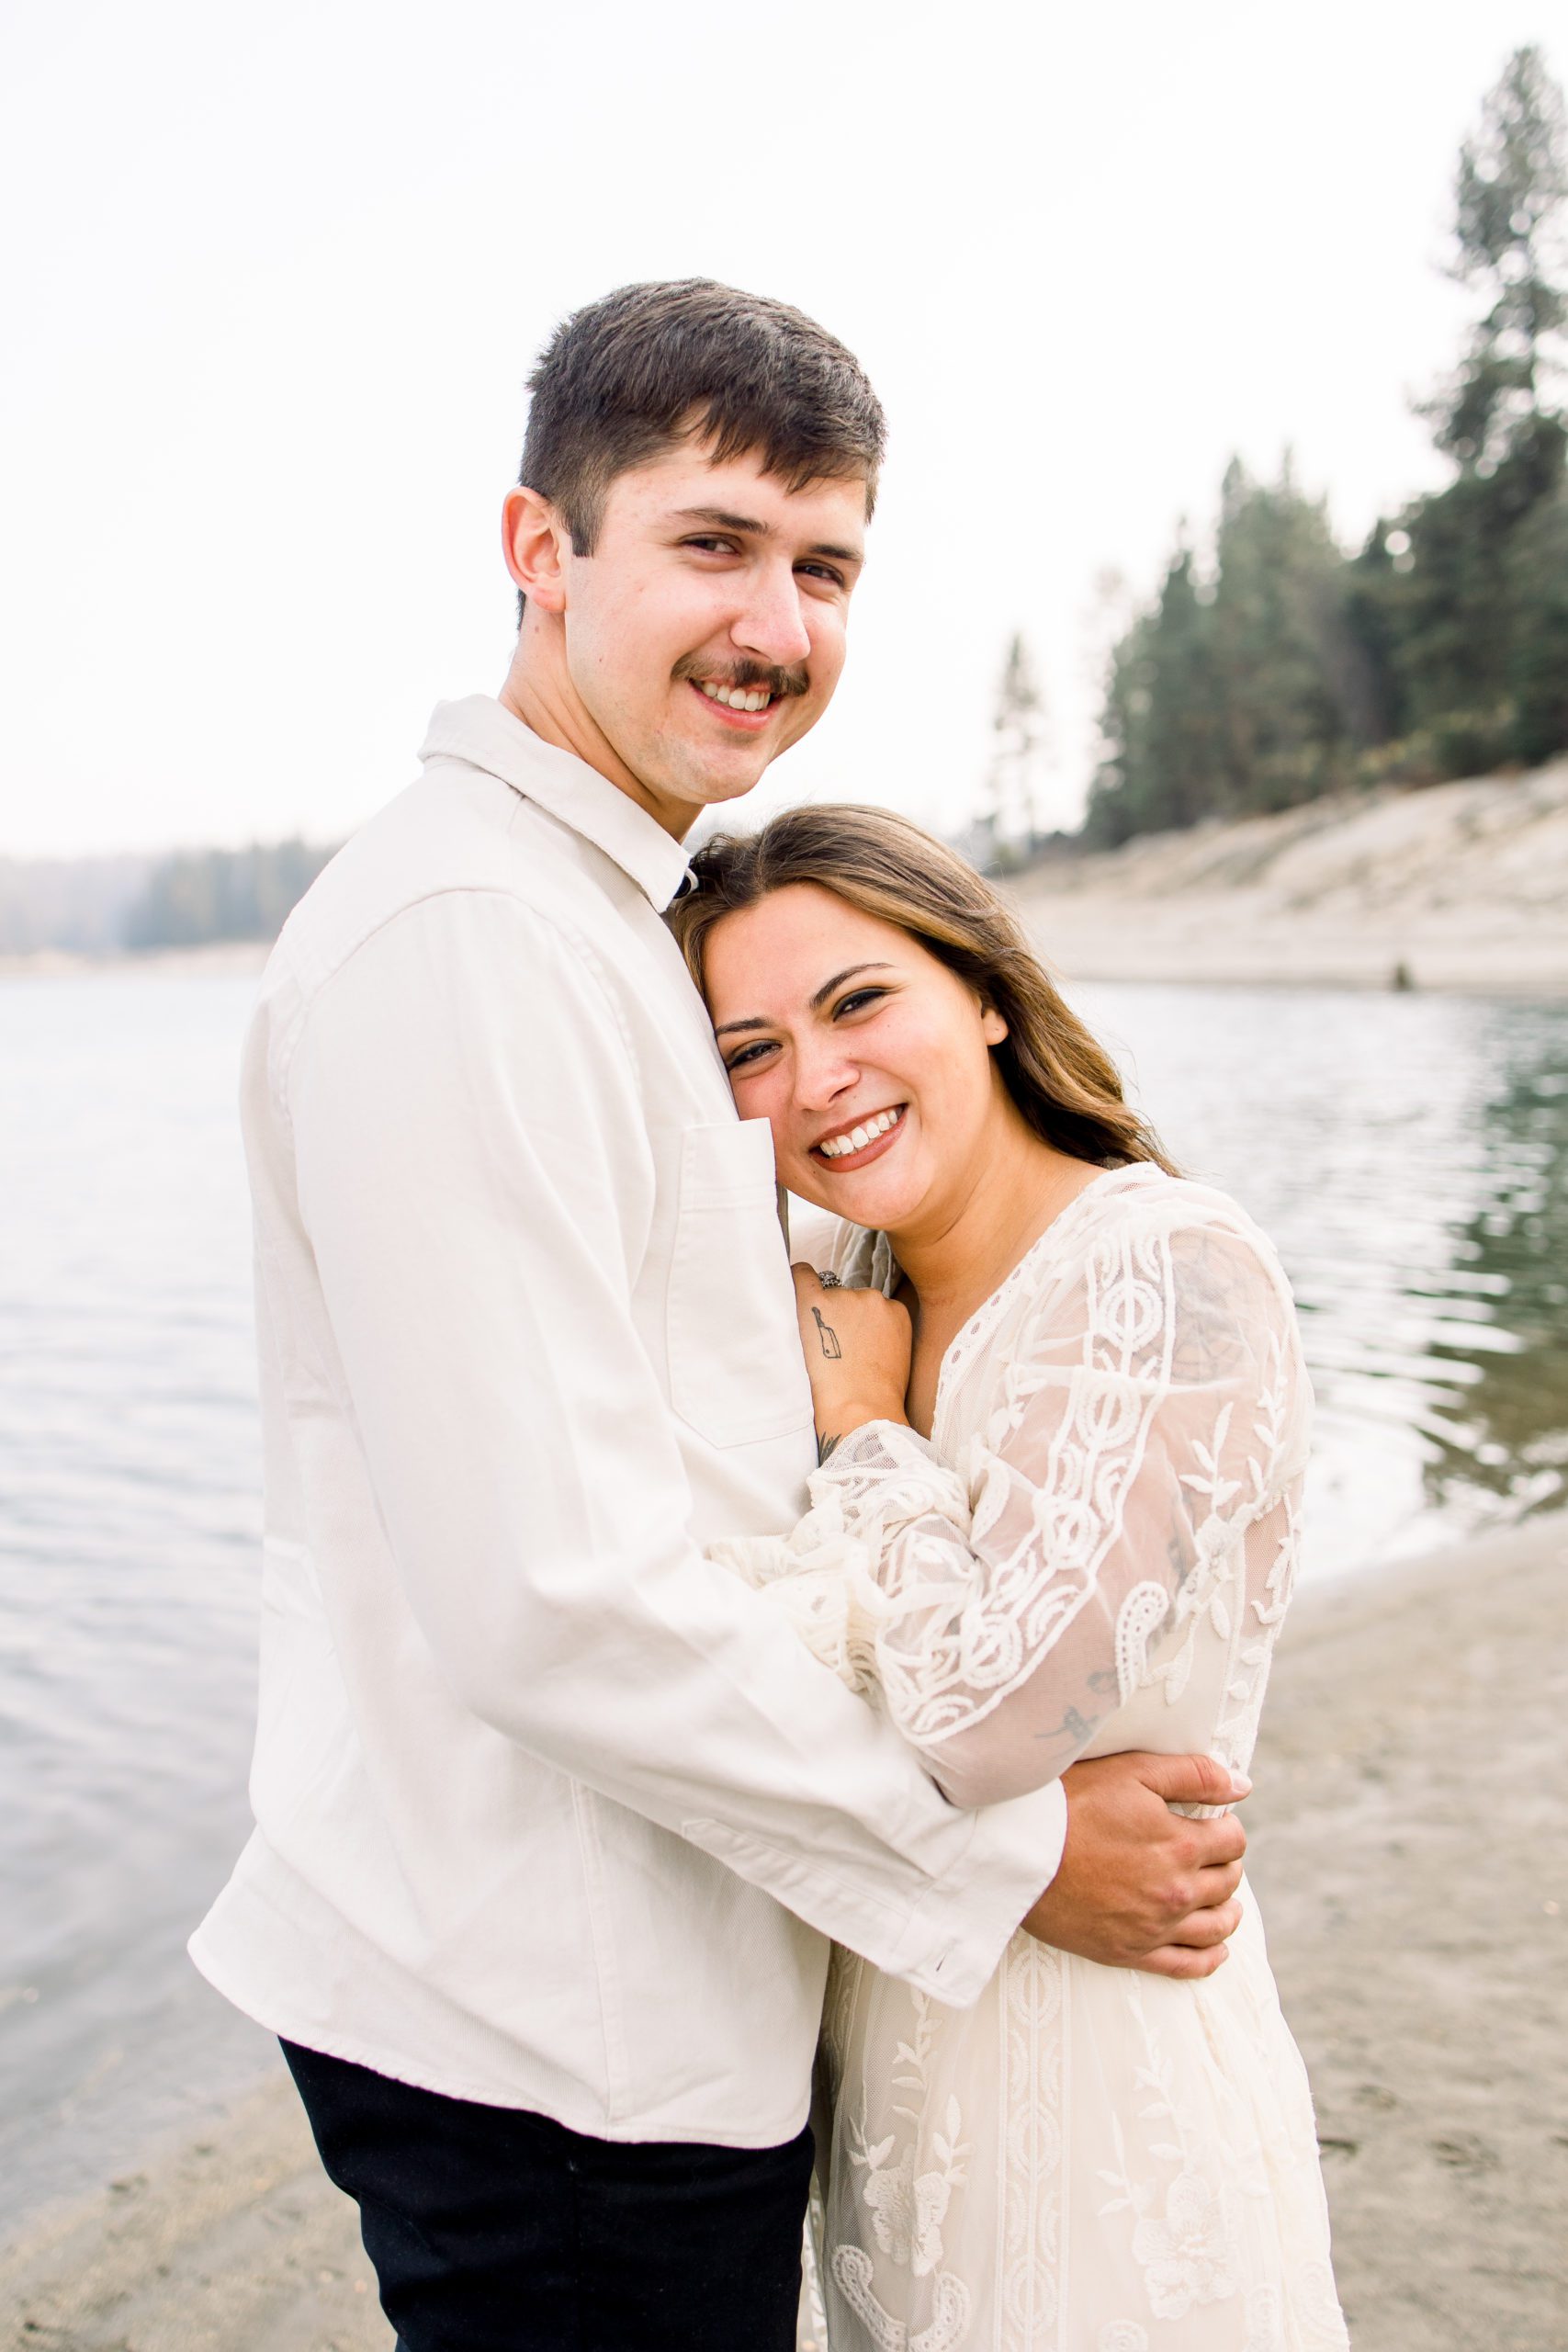 Bride and groom smile together during their portraits